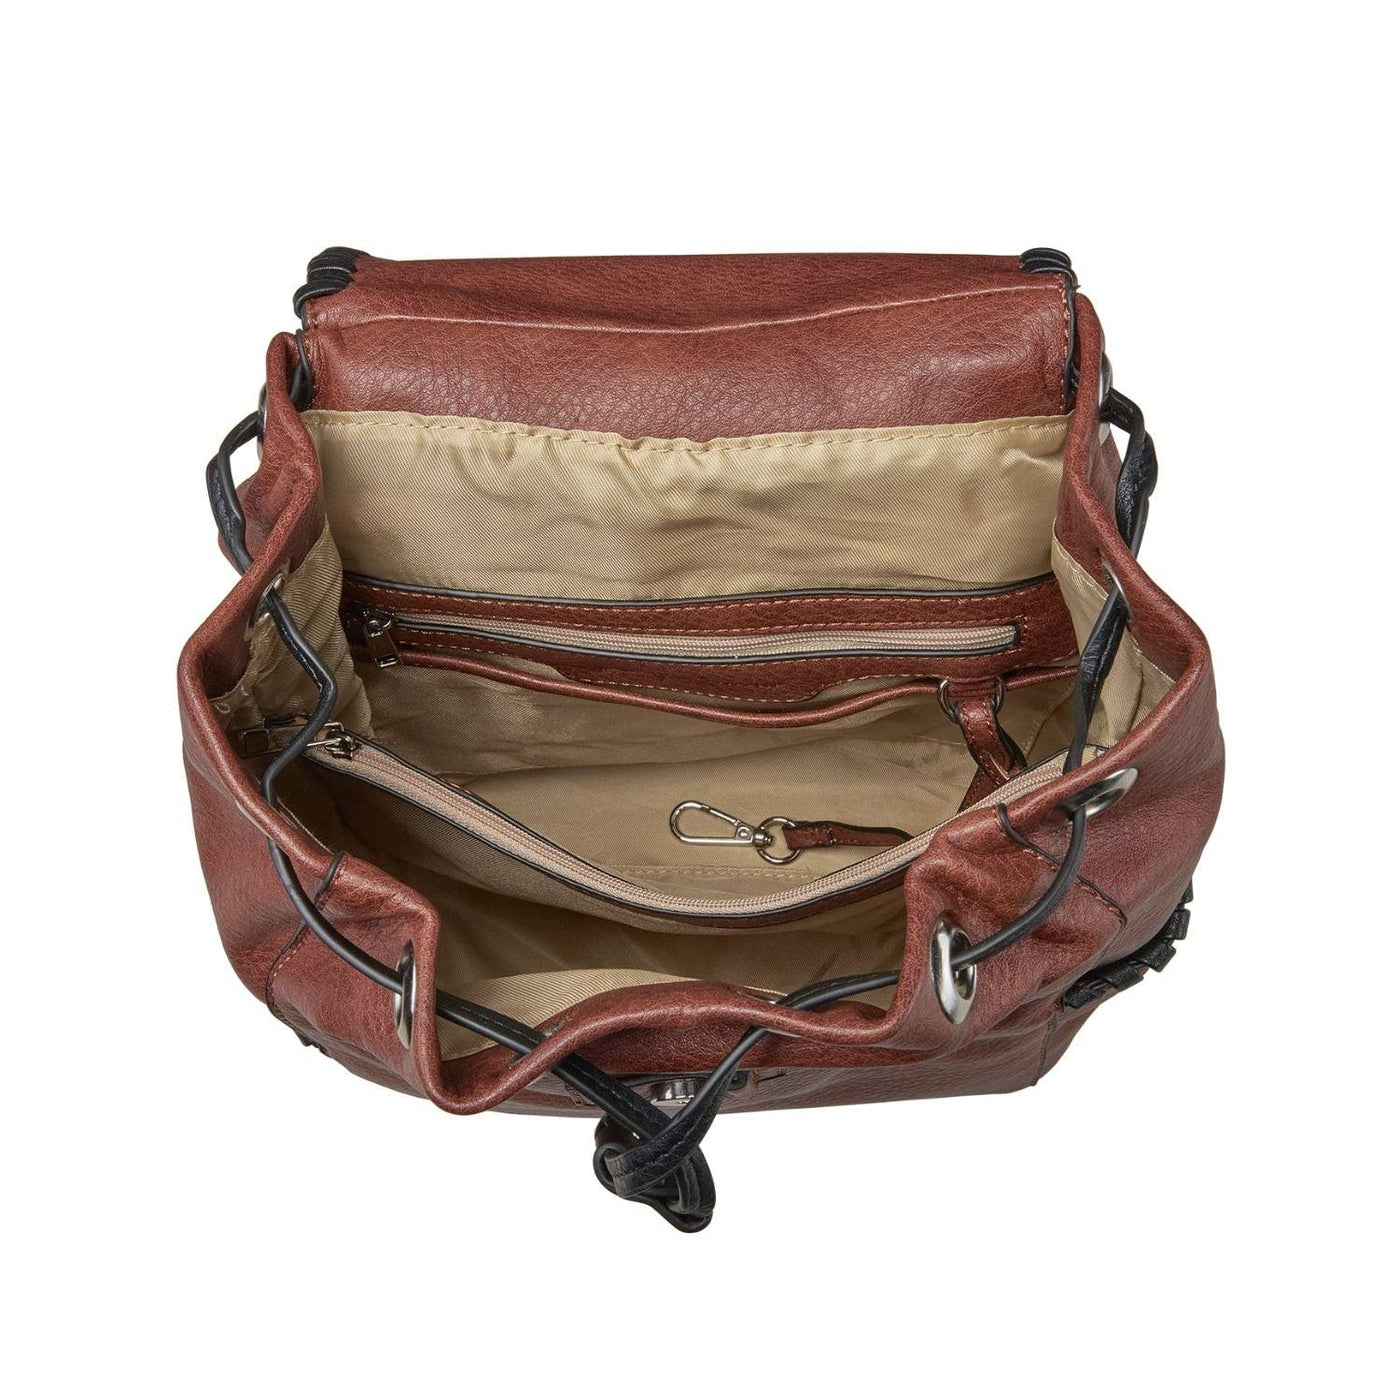 Concealed Carry Madelyn Backpack -  Lady Conceal Bags -  Lady Conceal -  Backpack with Universal Holster -  Locking YKK -  Backpack for Conceal Carry -  best gun carry backpack -  Pistol and Firearm Bag -  Western Hide Backpack -  Boho Stylish Backpack for Women -  Universal Holster Bag -  Women's Concealed Carry Bagpack -  premium leather backpack 